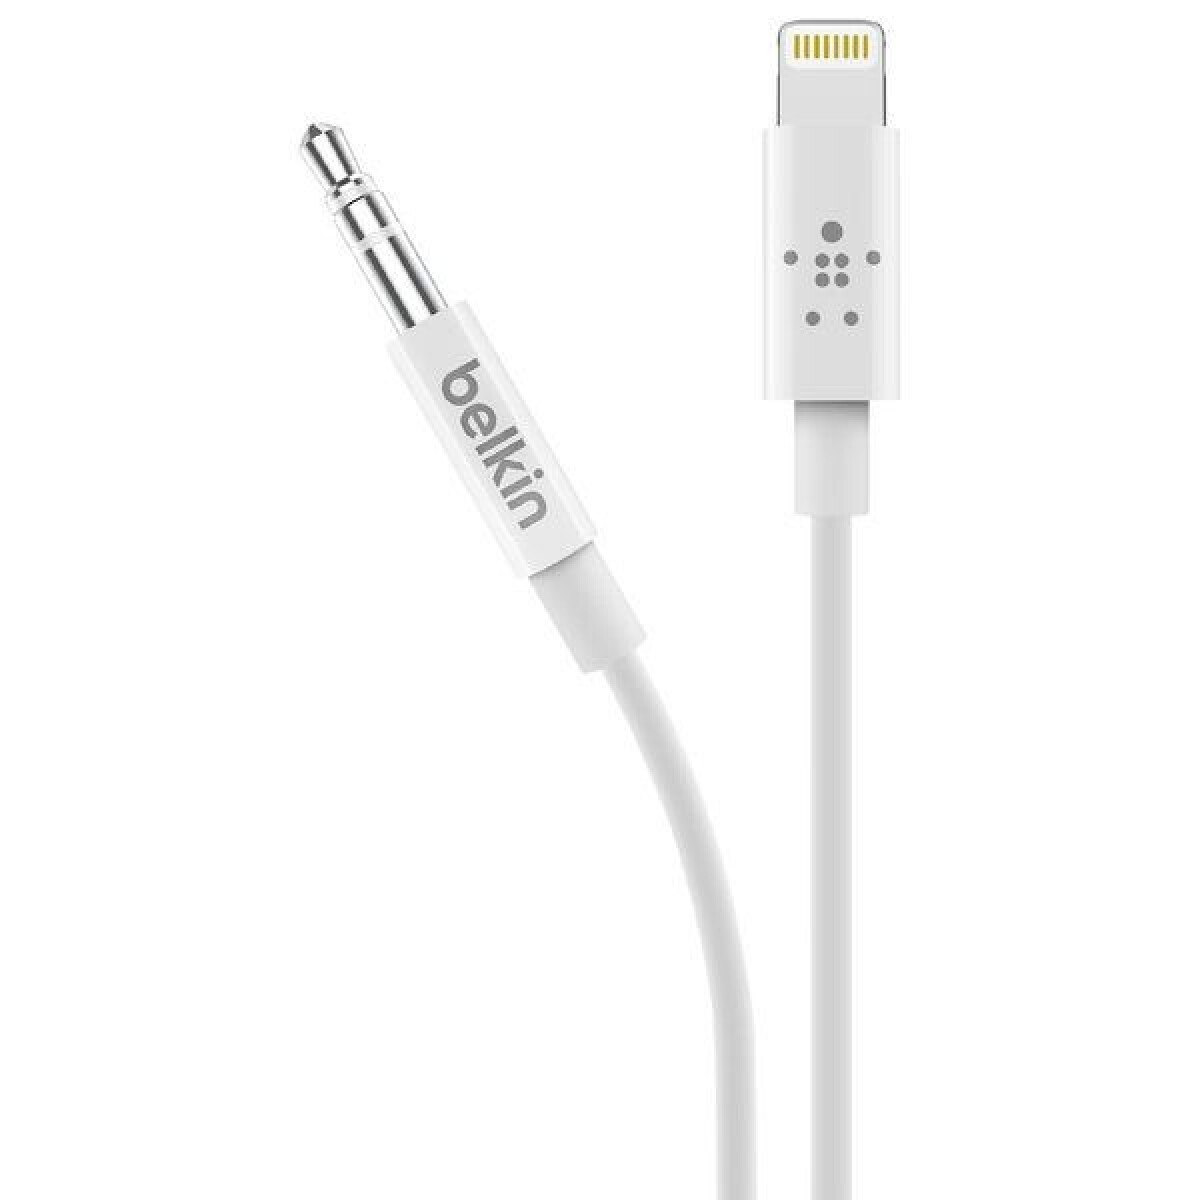 CABLE AUXILIAR LIGHTNING A 3.5MM 0.9M BELKIN - BLANCO 